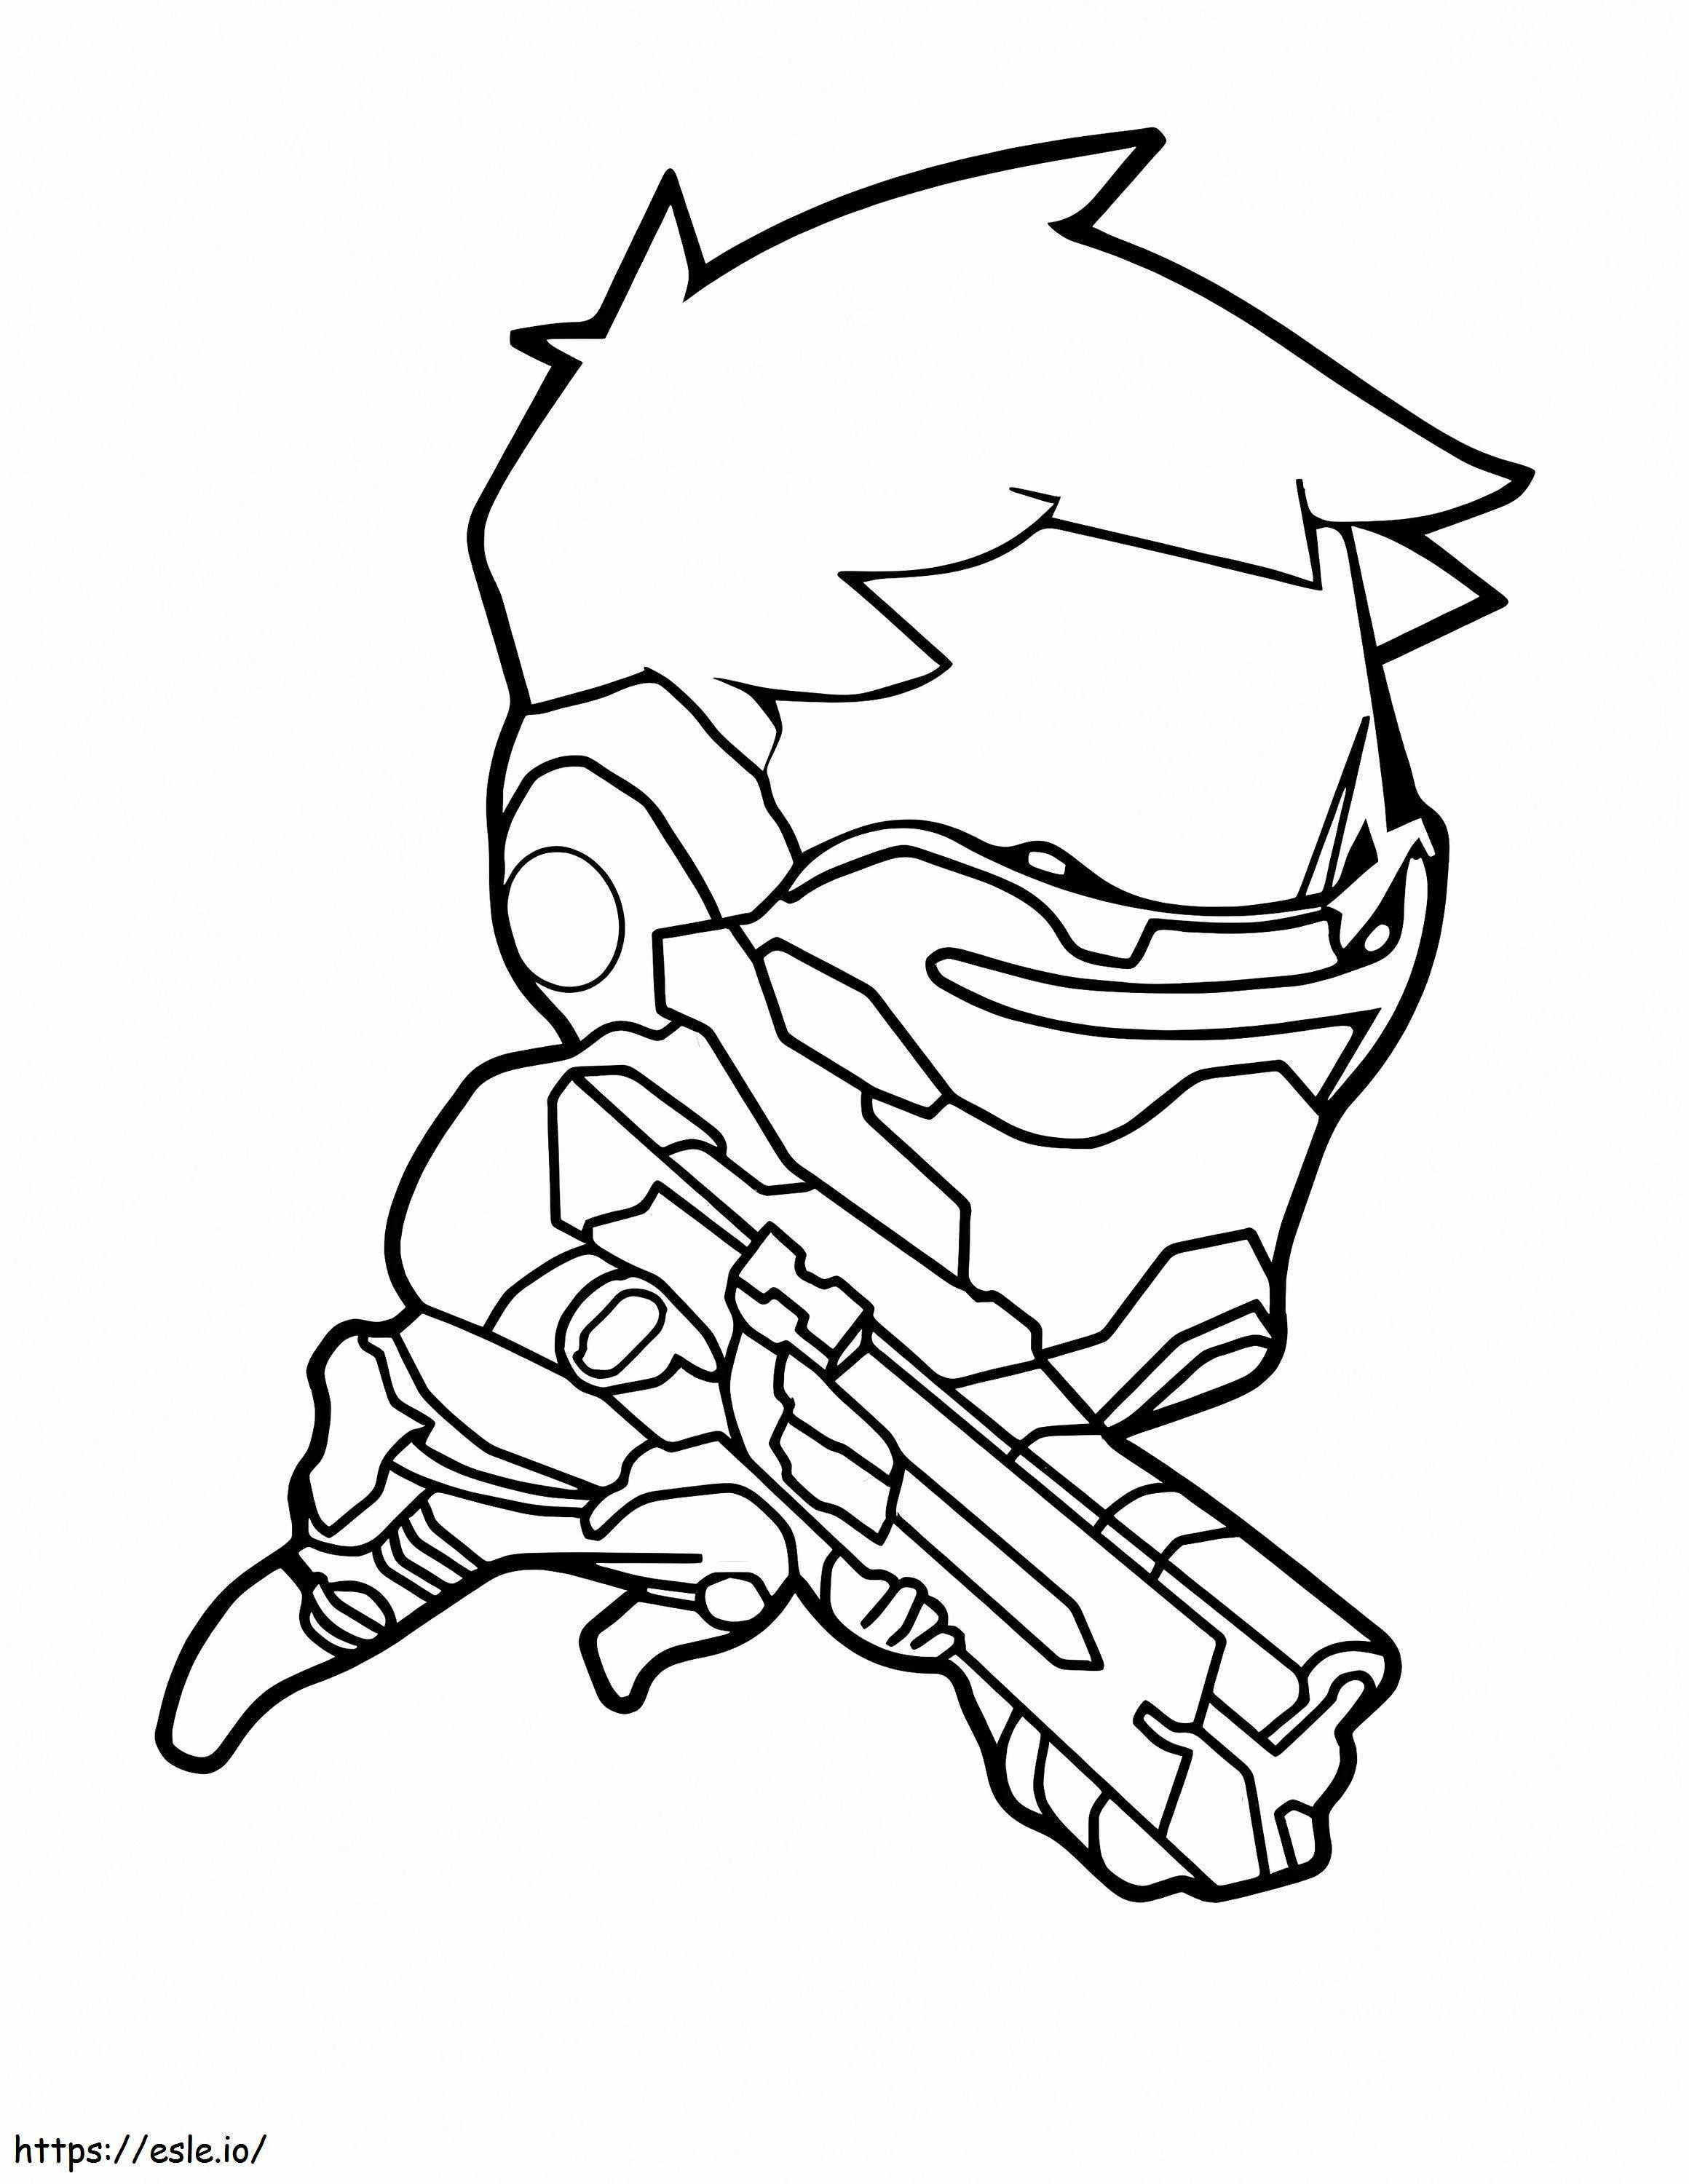 Chibi Soldier Overwatch coloring page